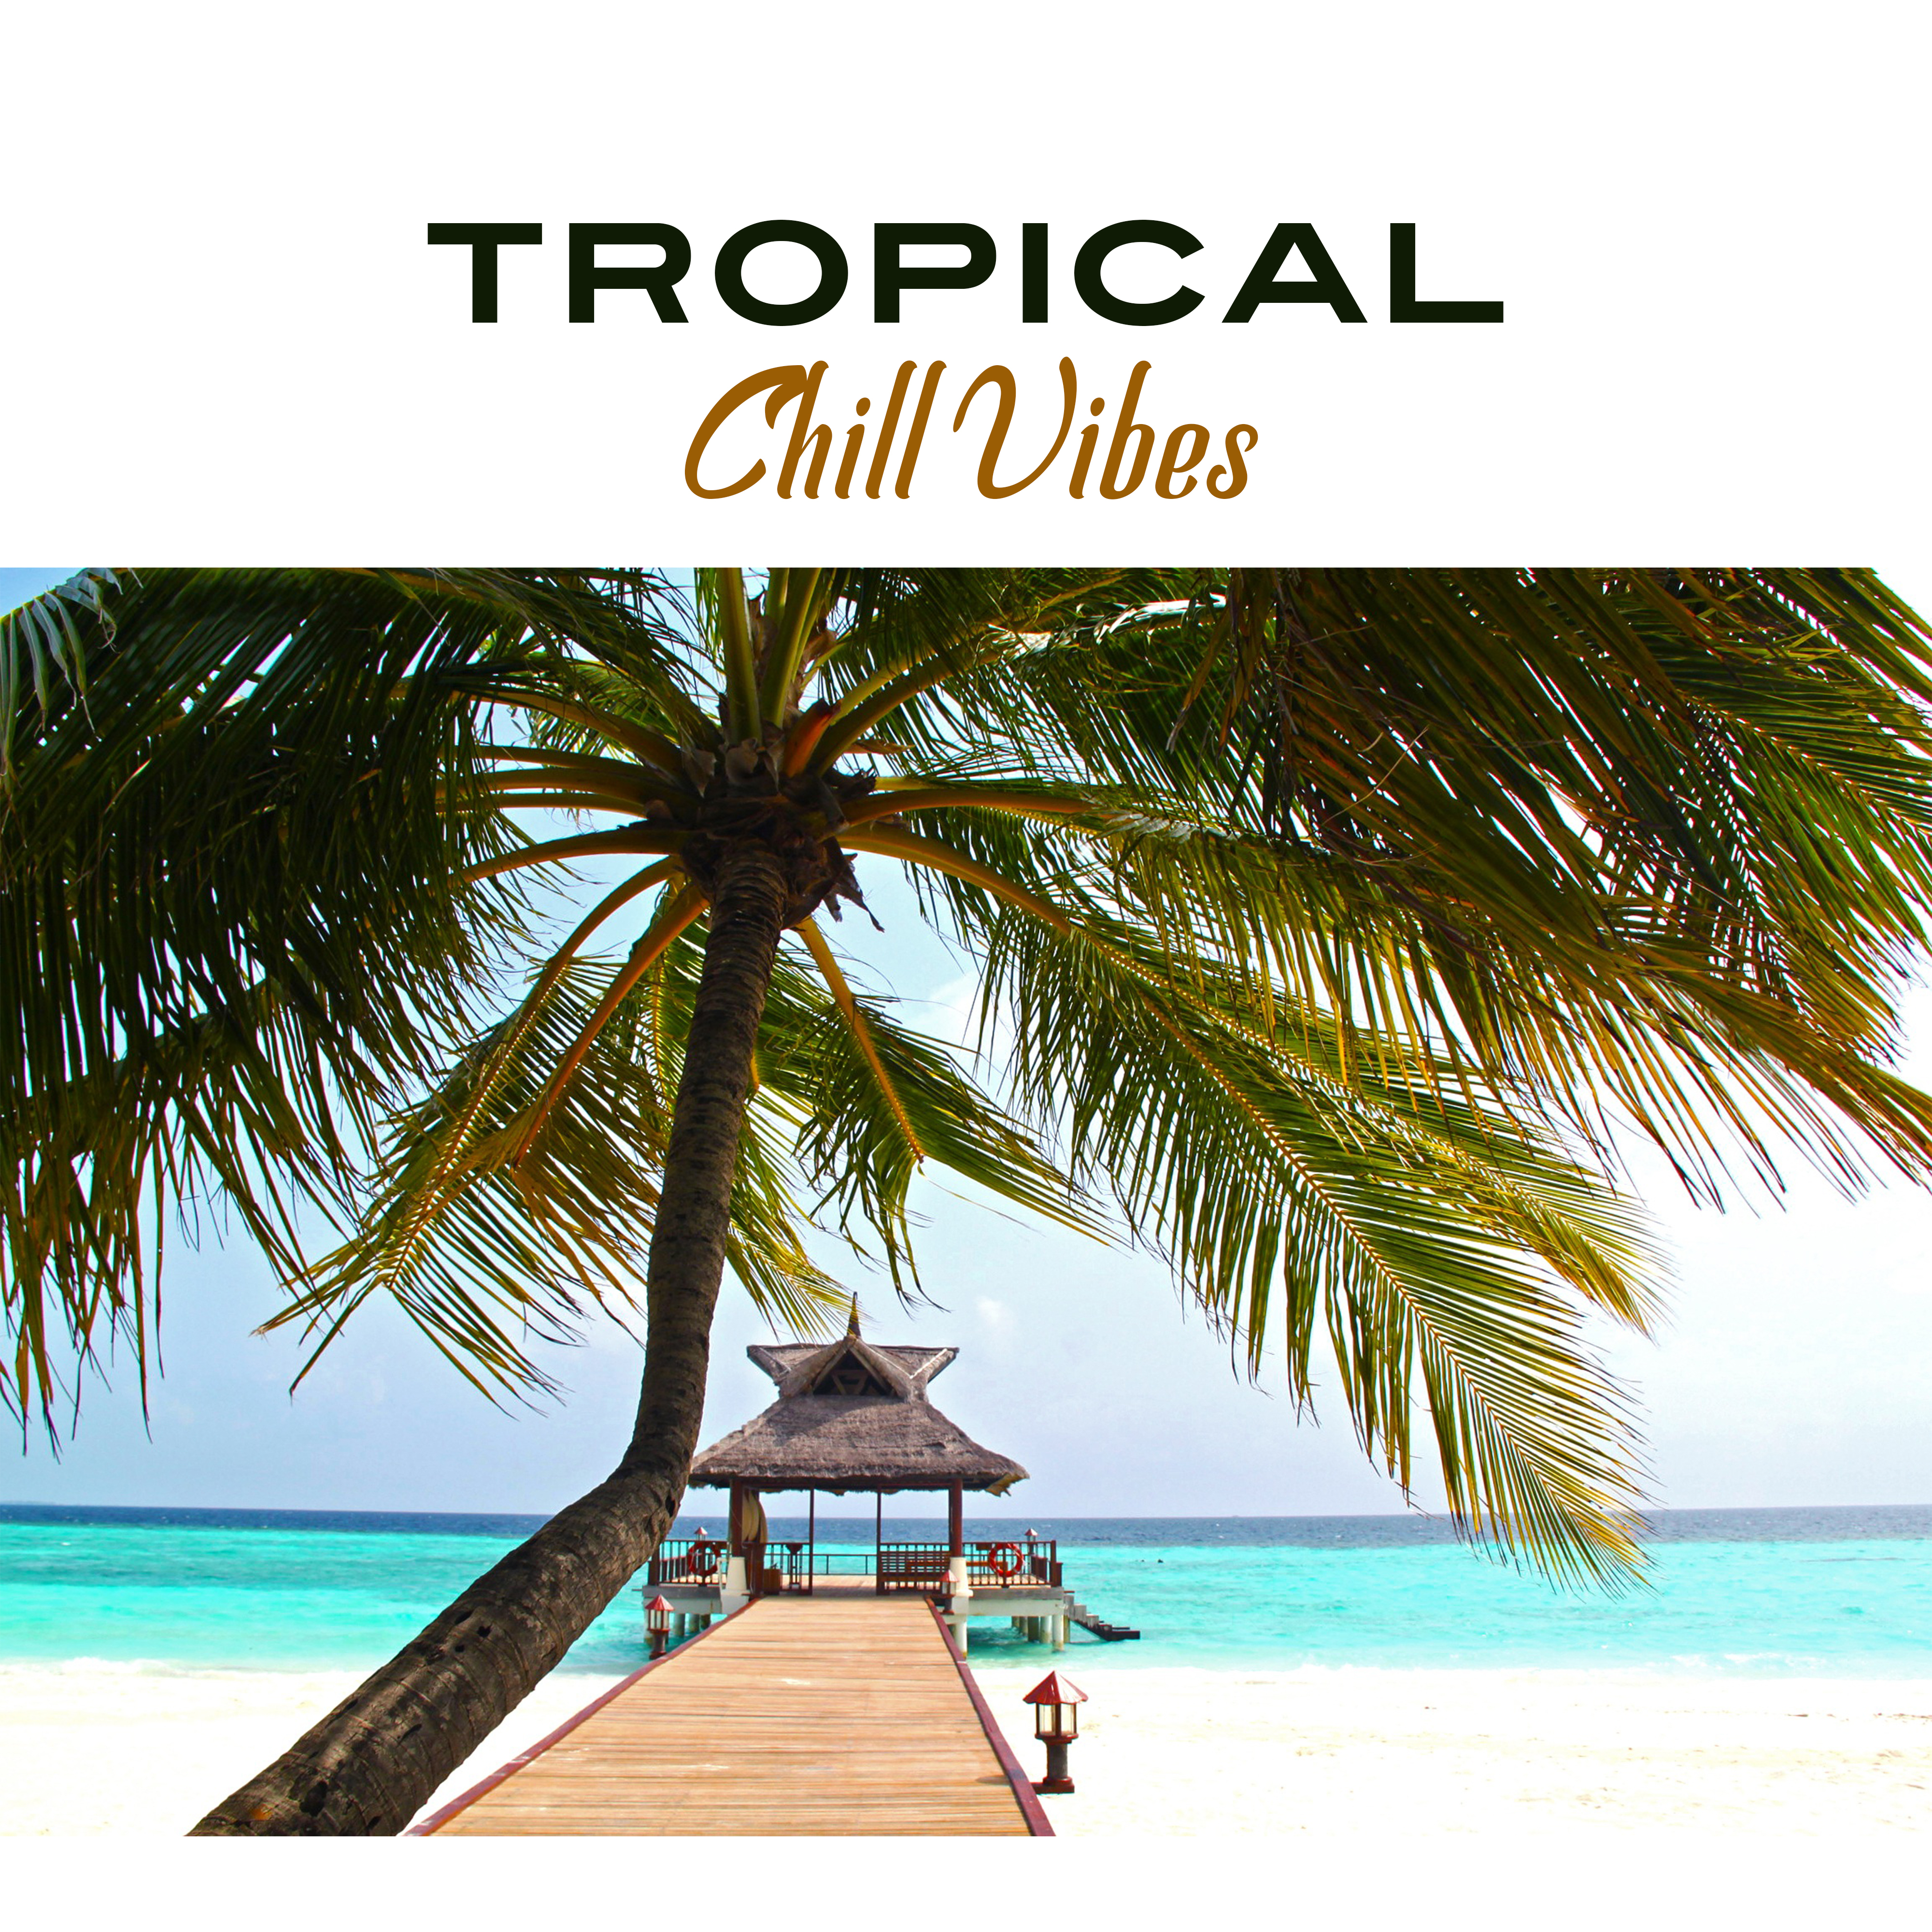 Tropical Chill Vibes  Relaxing Chill Out Music, Sounds to Chill, Electronic Beats